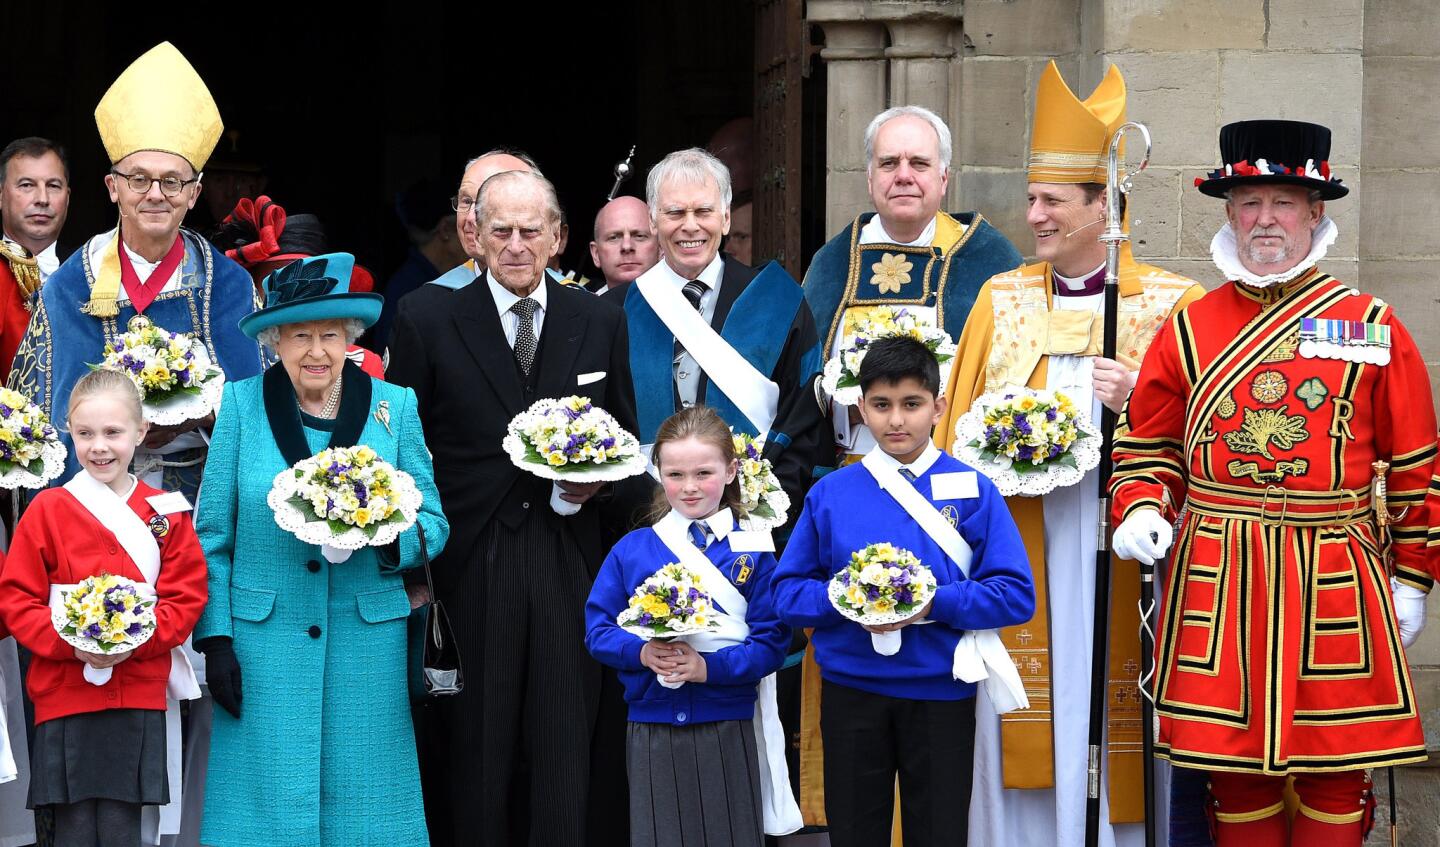 Queen Elizabeth II and Prince Philip attend the Royal Maundy Service in Leicester Cathedral on April 13, 2017.